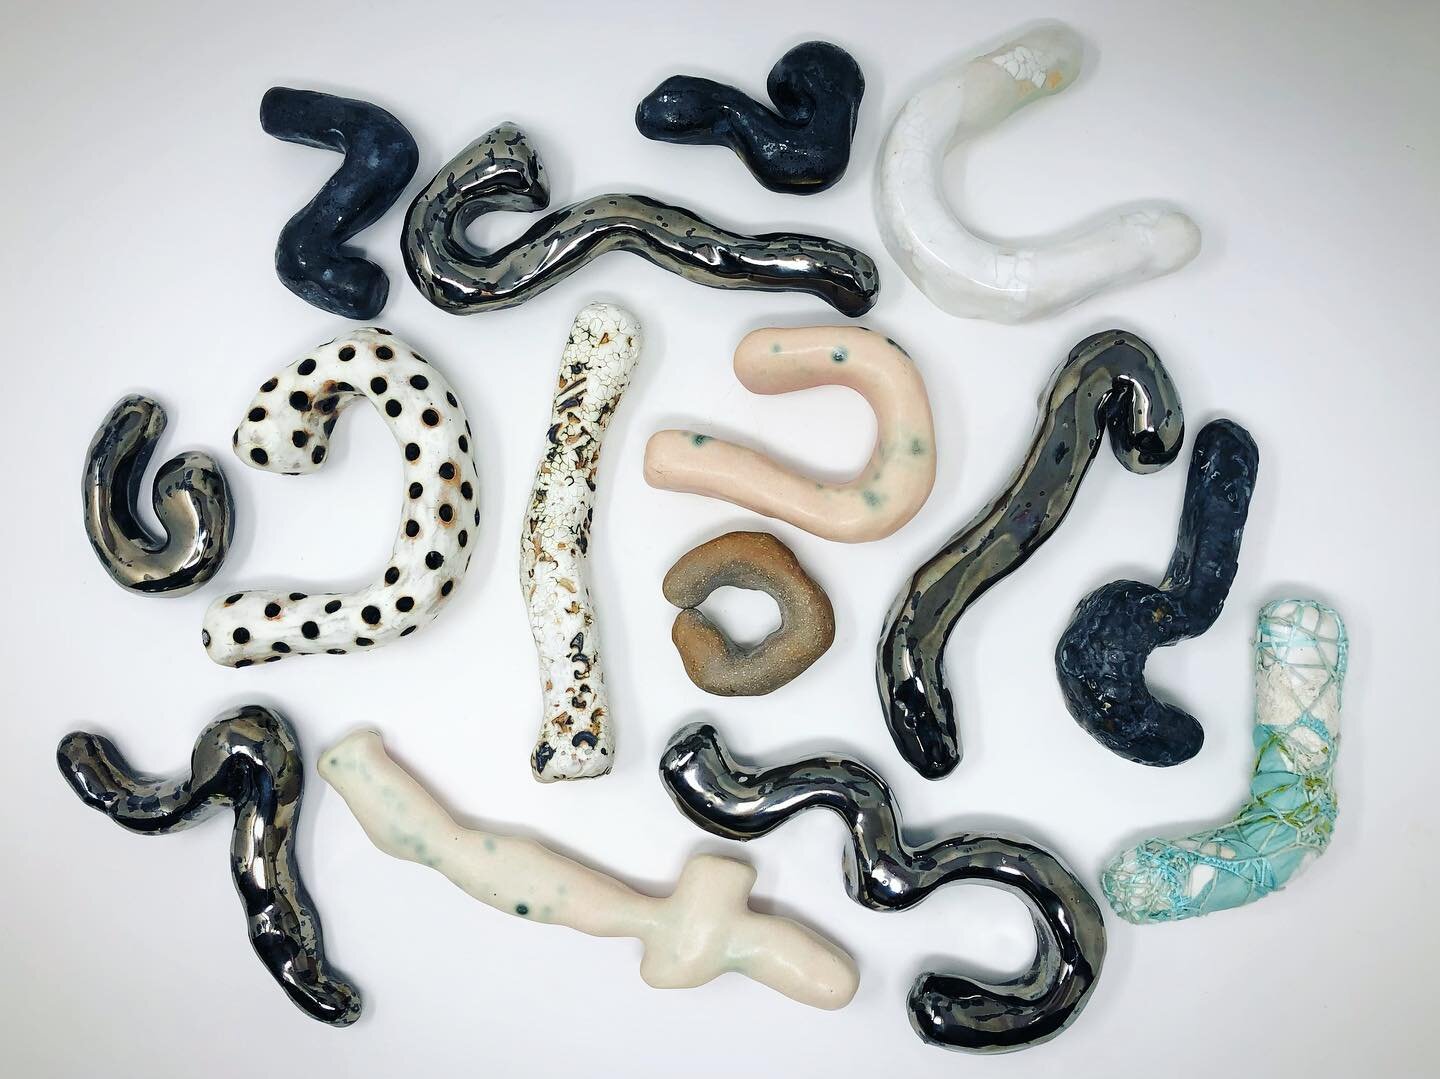 i spent the summer making ceramic reproductions of my mother&rsquo;s chromosomes.  on september 10, these 15 will hang on the wall with 3 dozen more (and then some) for @bunnyburson &lsquo;s show EVERYTHING THAT WAS &hellip; STILL IS.  i was, and sti